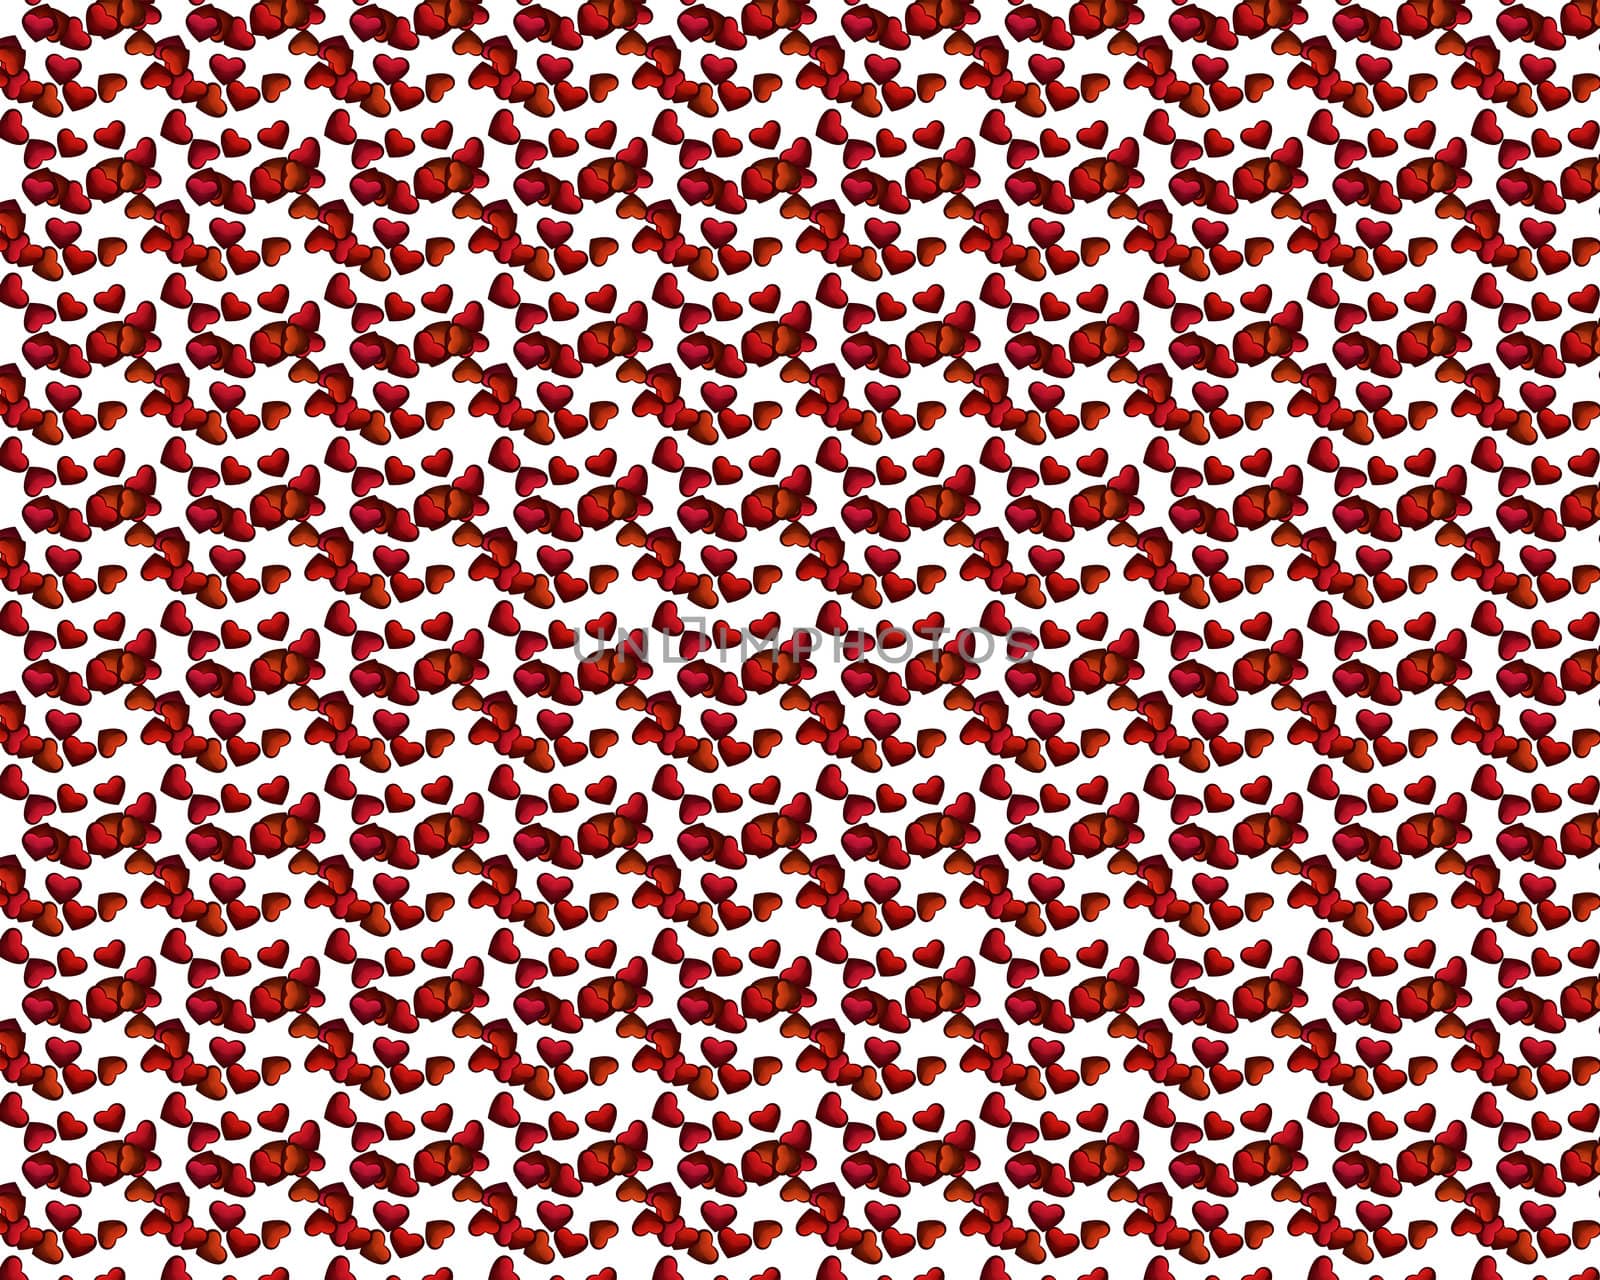   small red hearts scattered on white background